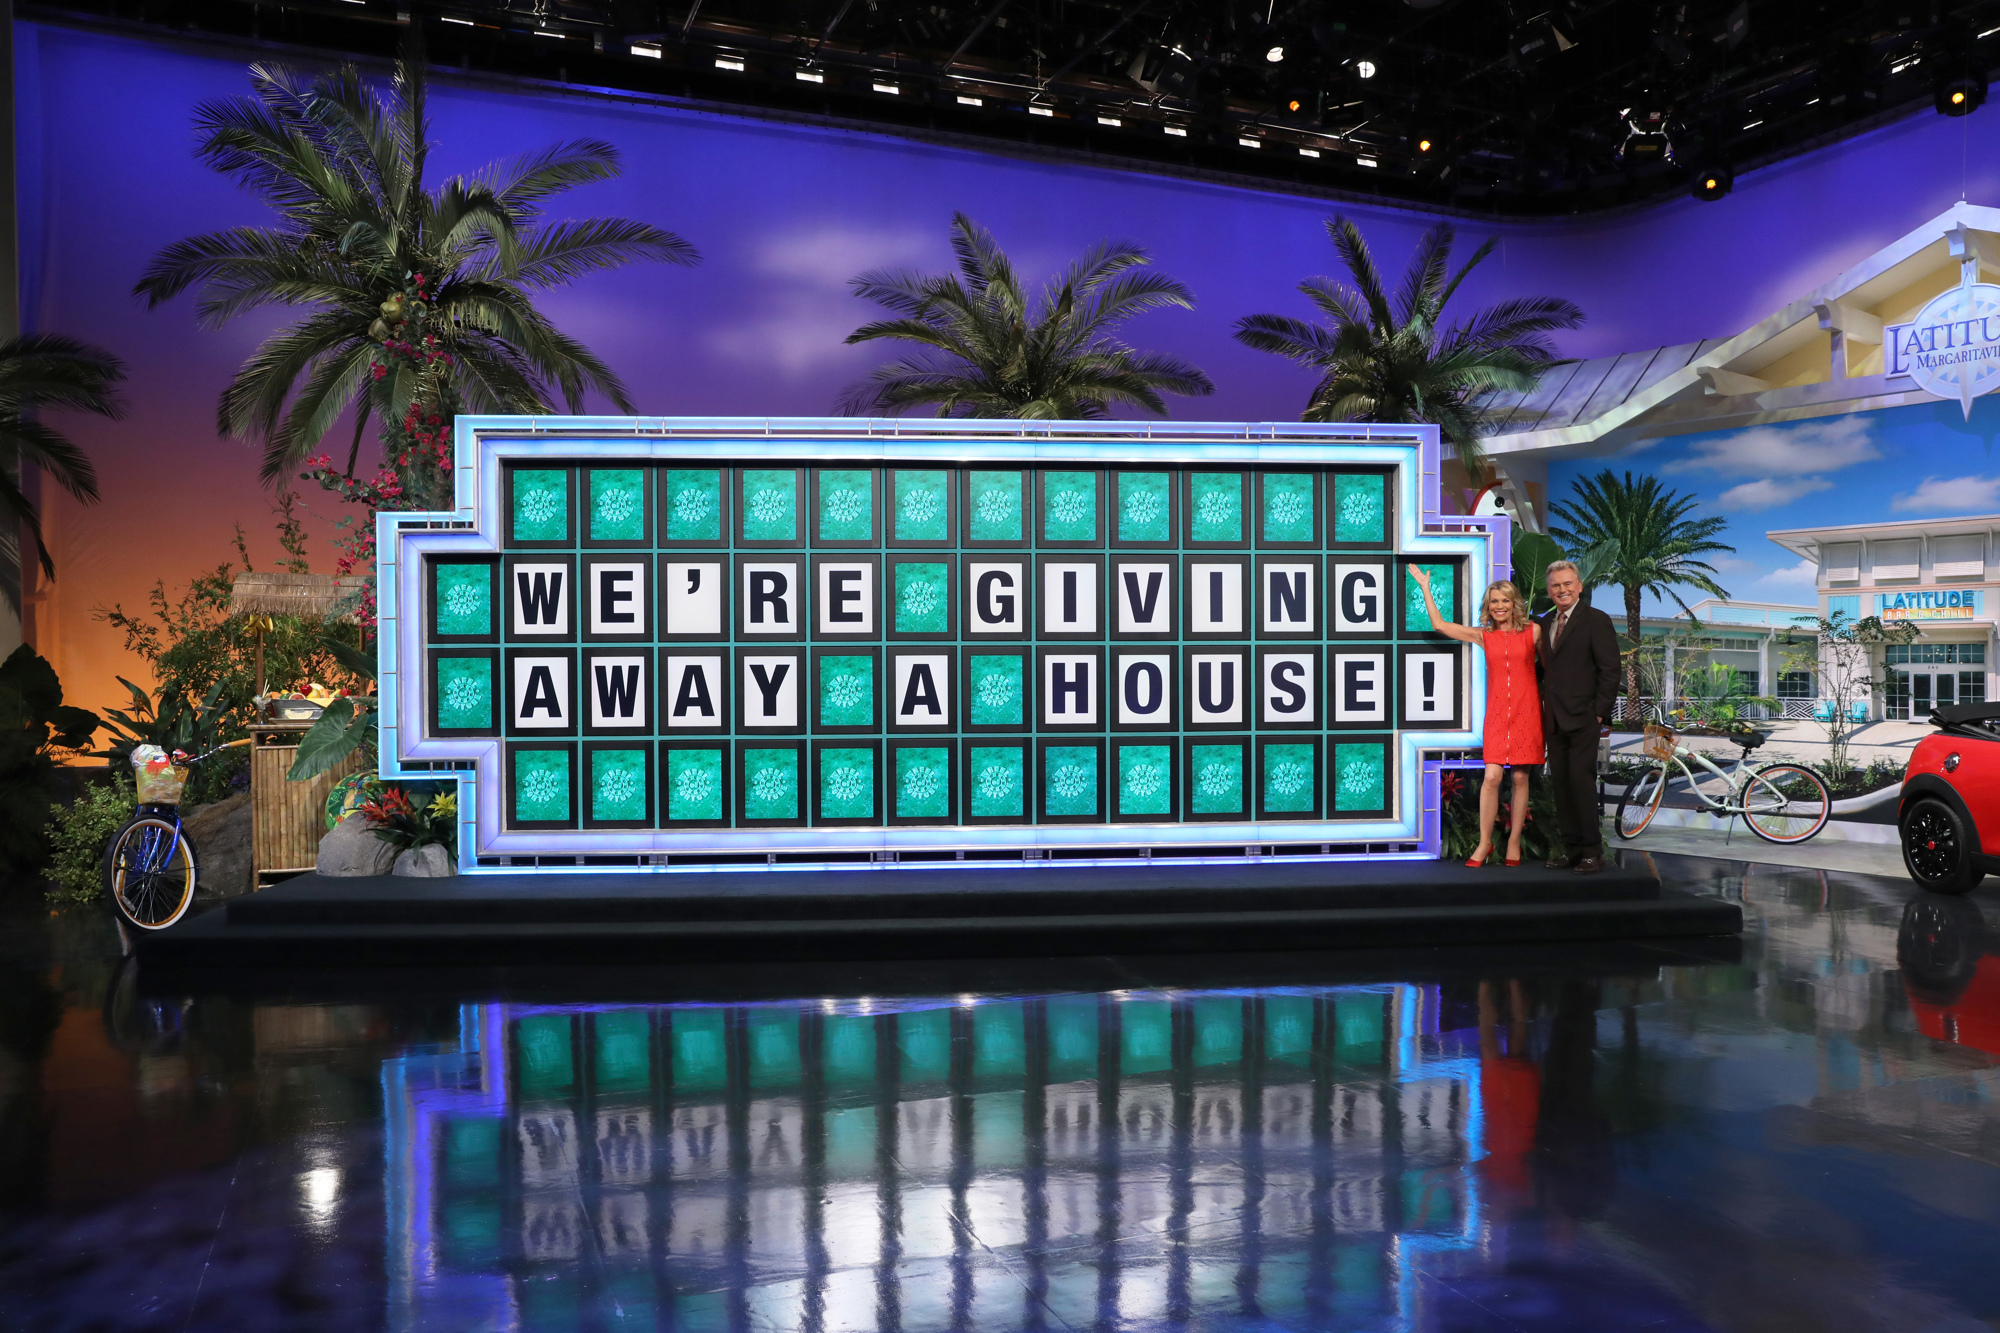 Vanna White and Pat Sajak at Wheel of Fortune puzzleboard. Photo by Carol Kaelson